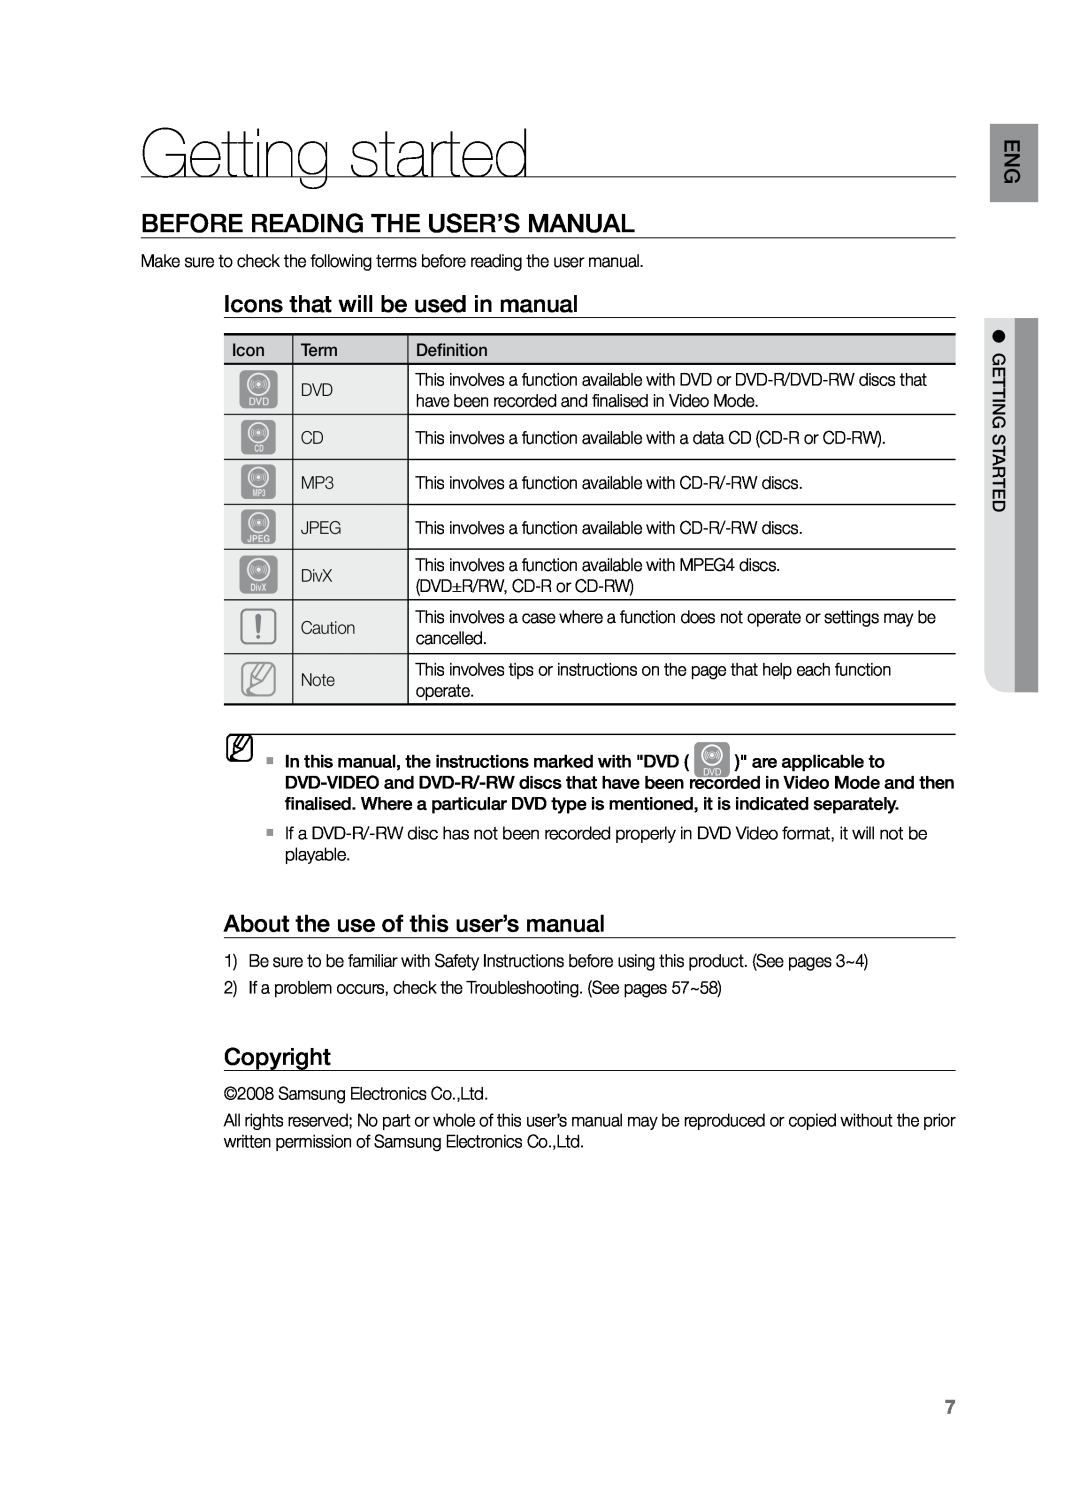 Samsung HT-Z221 user manual Getting started, Icons that will be used in manual, Copyright 